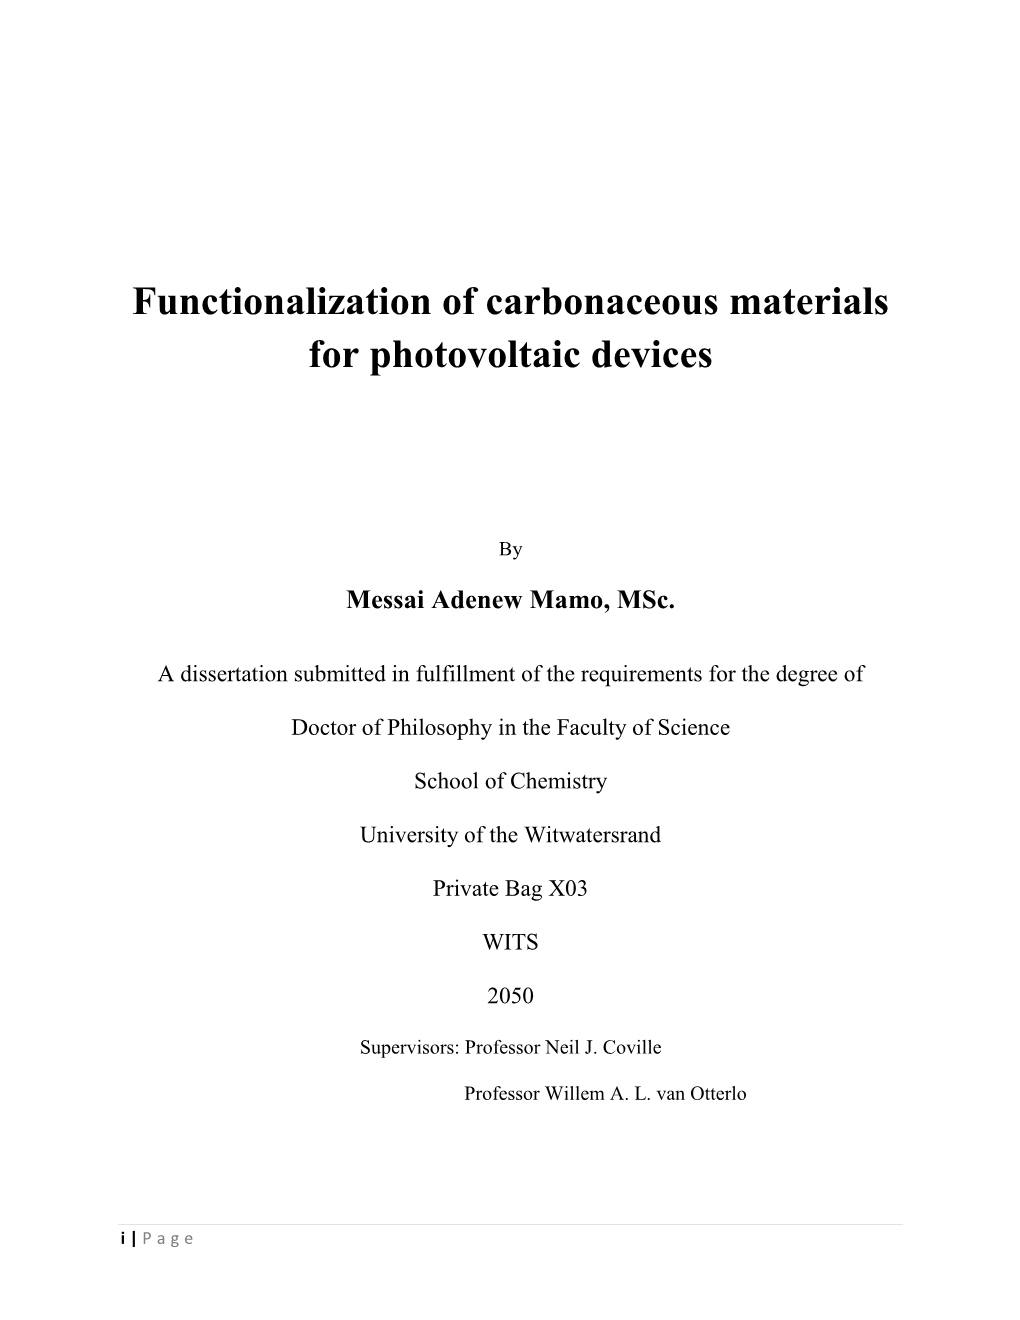 Functionalization of Carbonaceous Materials for Photovoltaic Devices